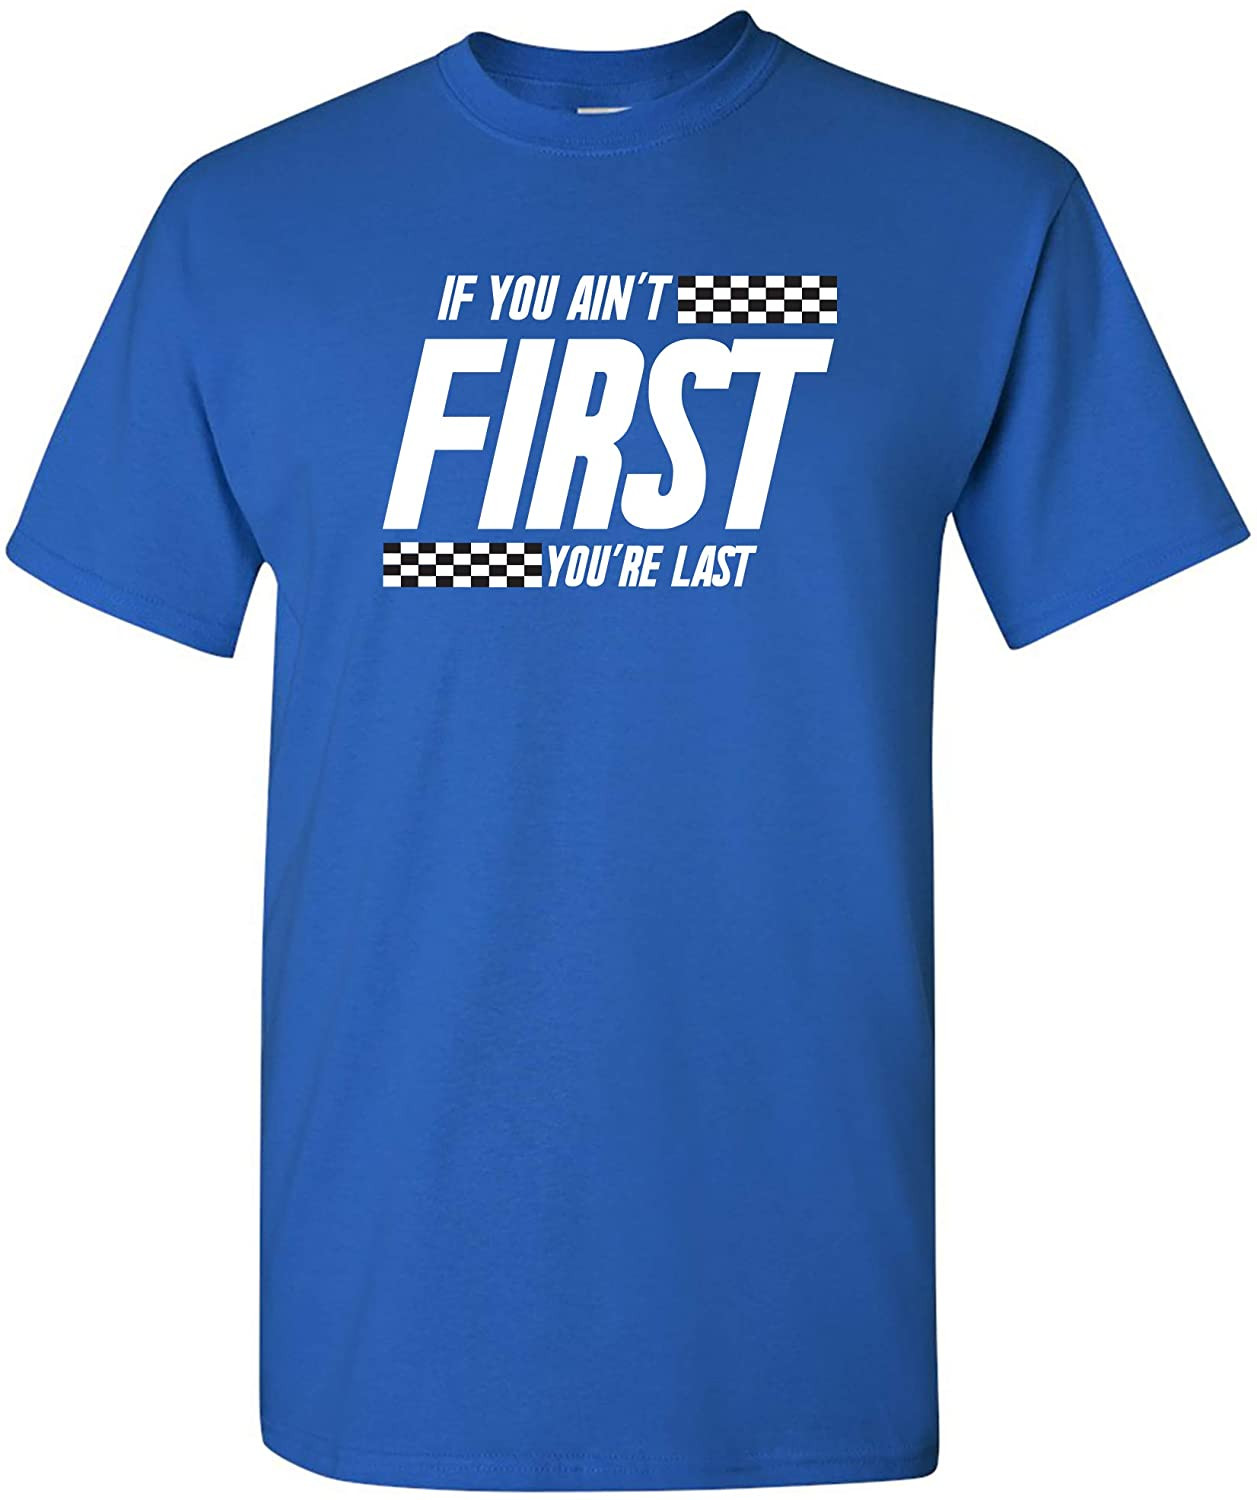 If You Ain't First You're Last - Race Car Racing Movie Quote T-Shirt